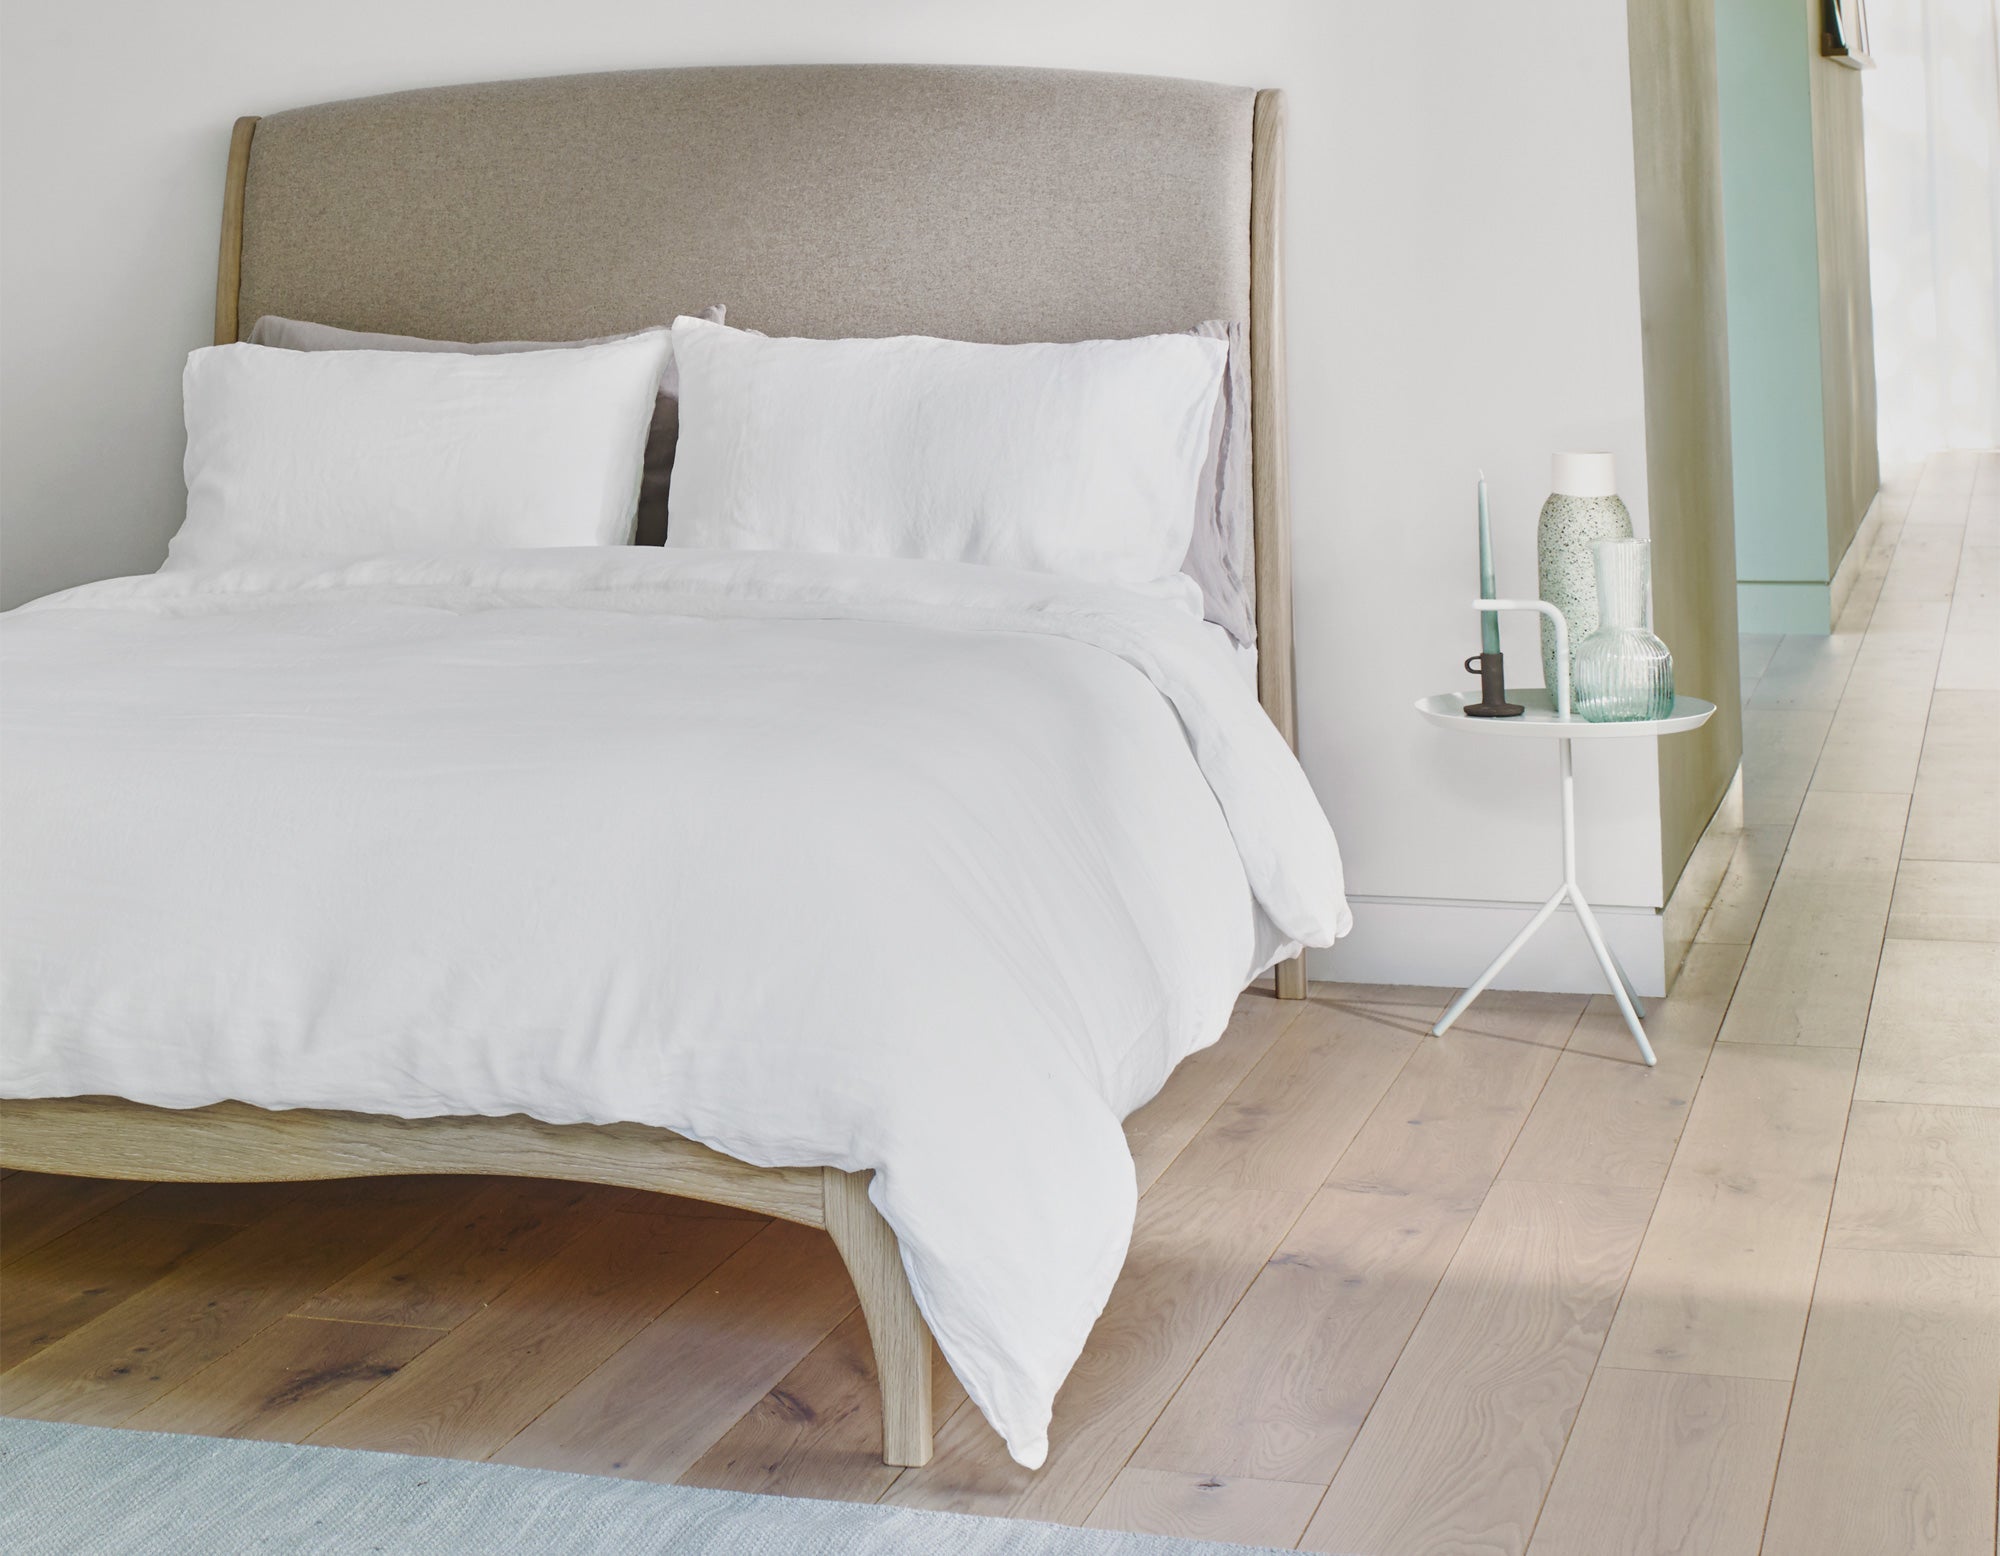 Super Soft Linen Sheet in White on Bed | scooms